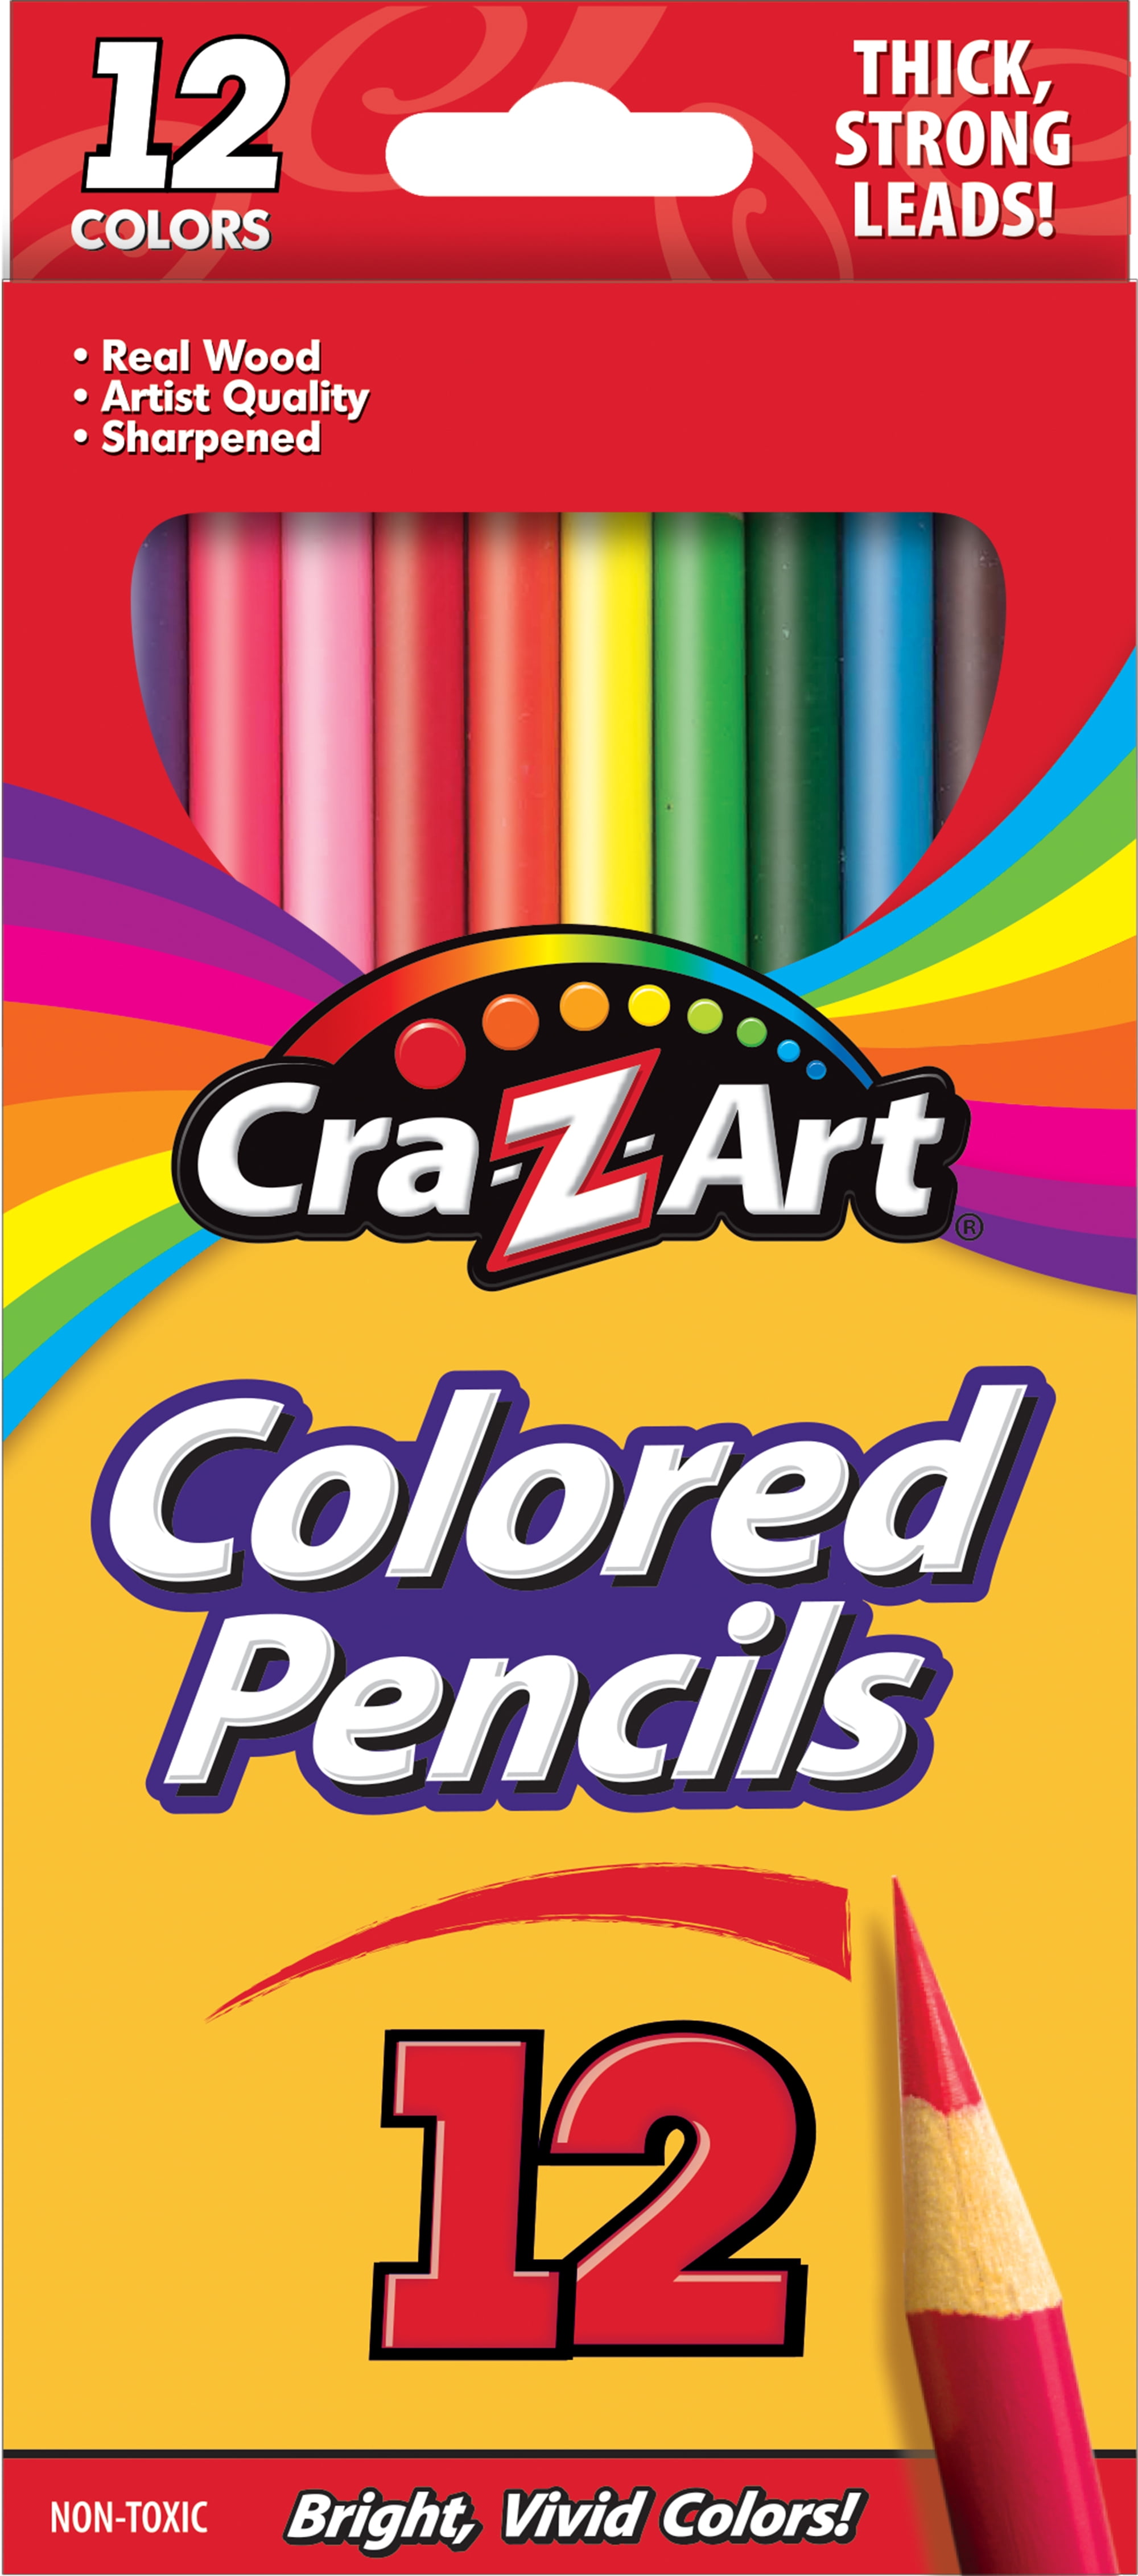 Cra-Z-Art Colored Pencils include many vibrant colors to choose from